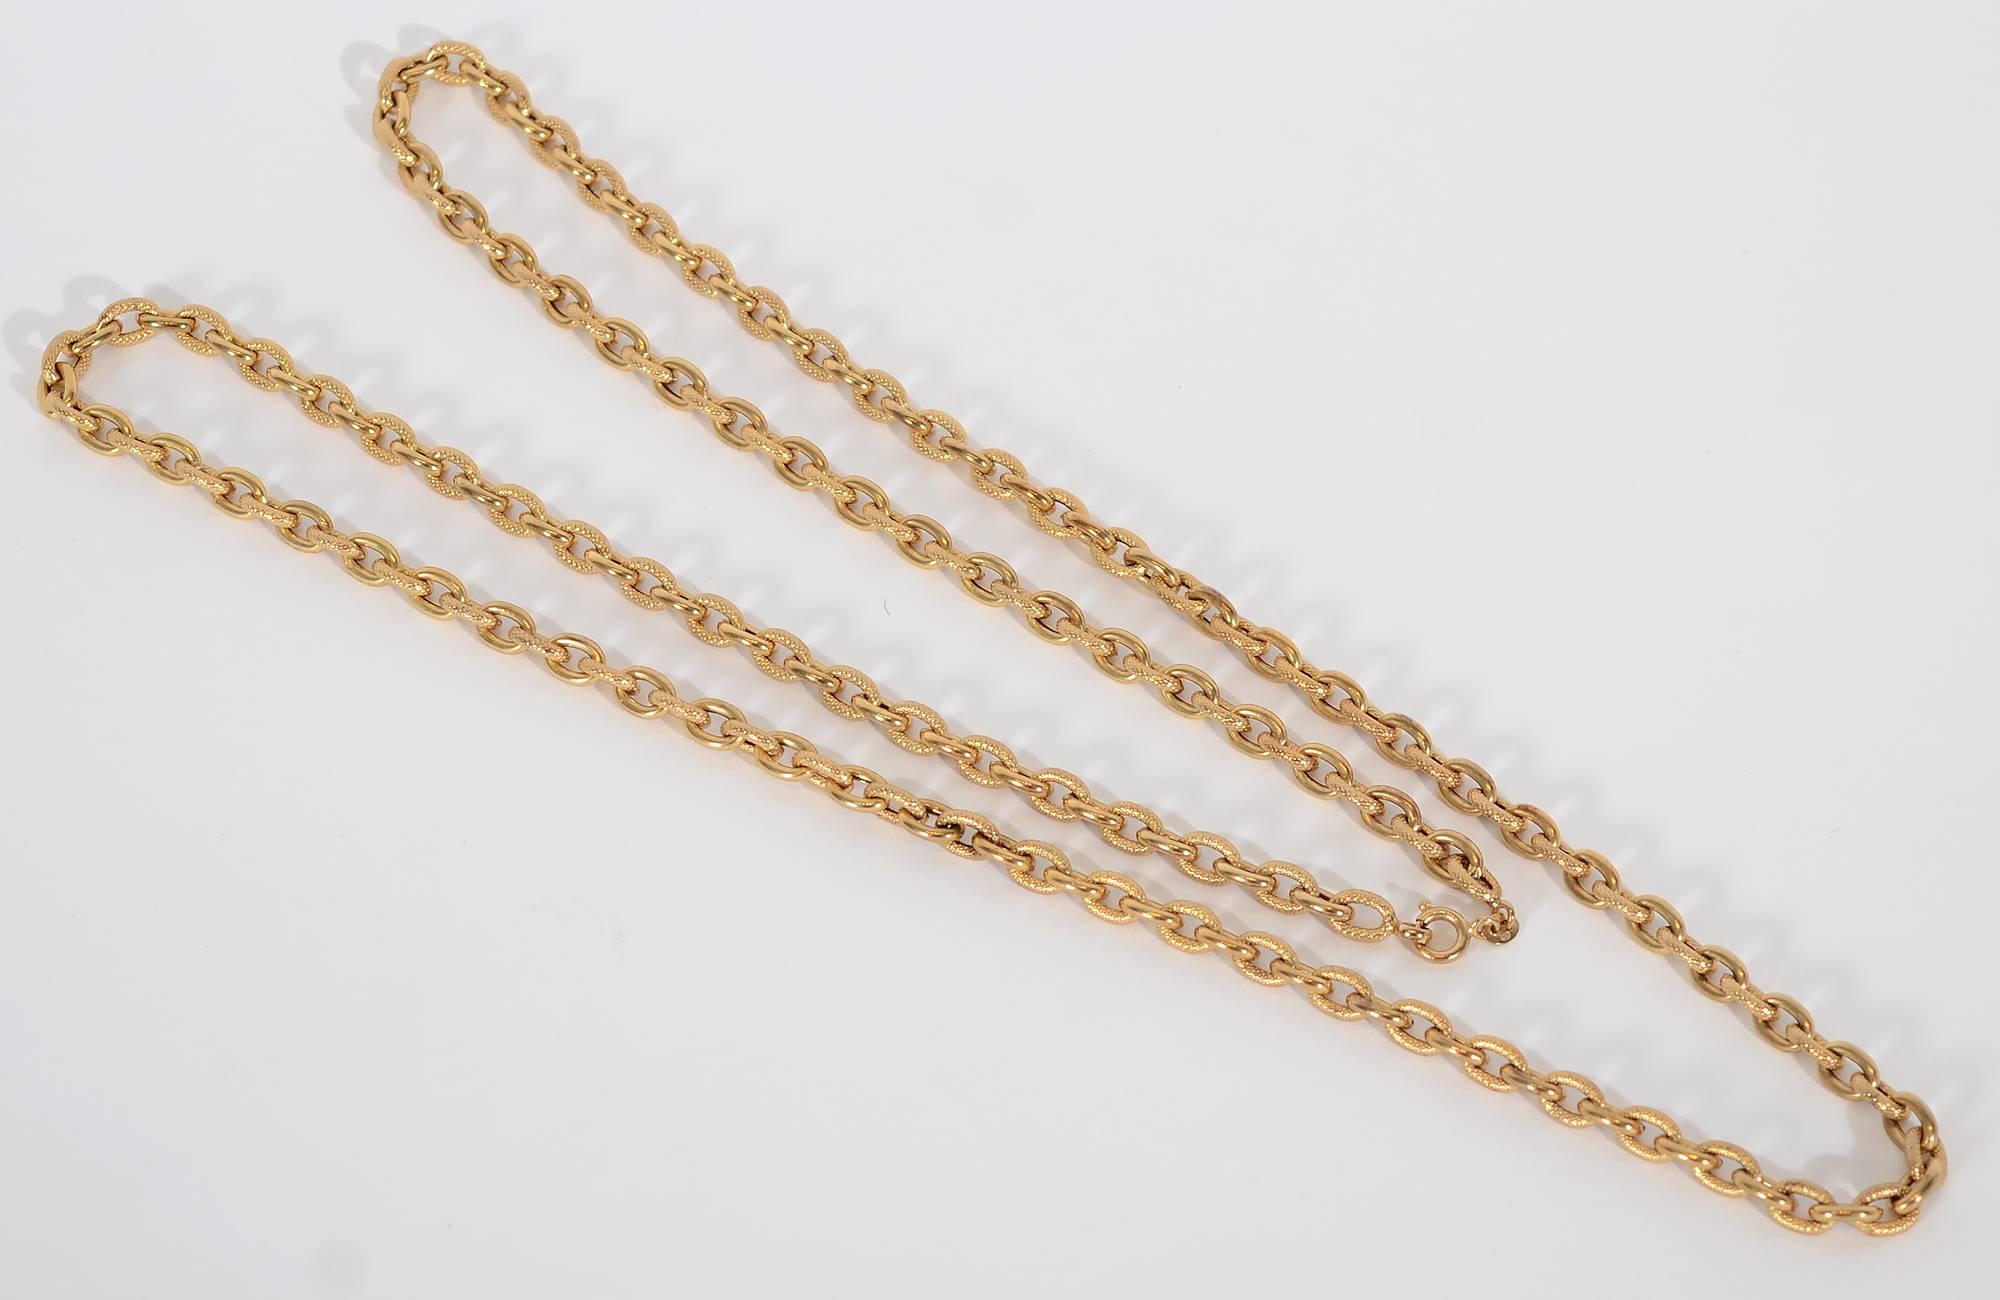 This long oval links gold chain is particularly versatile. It can be worn by itself;  with a pendant or doubled as a choker.
Smooth  links alternate with textured. It is 35 1/2